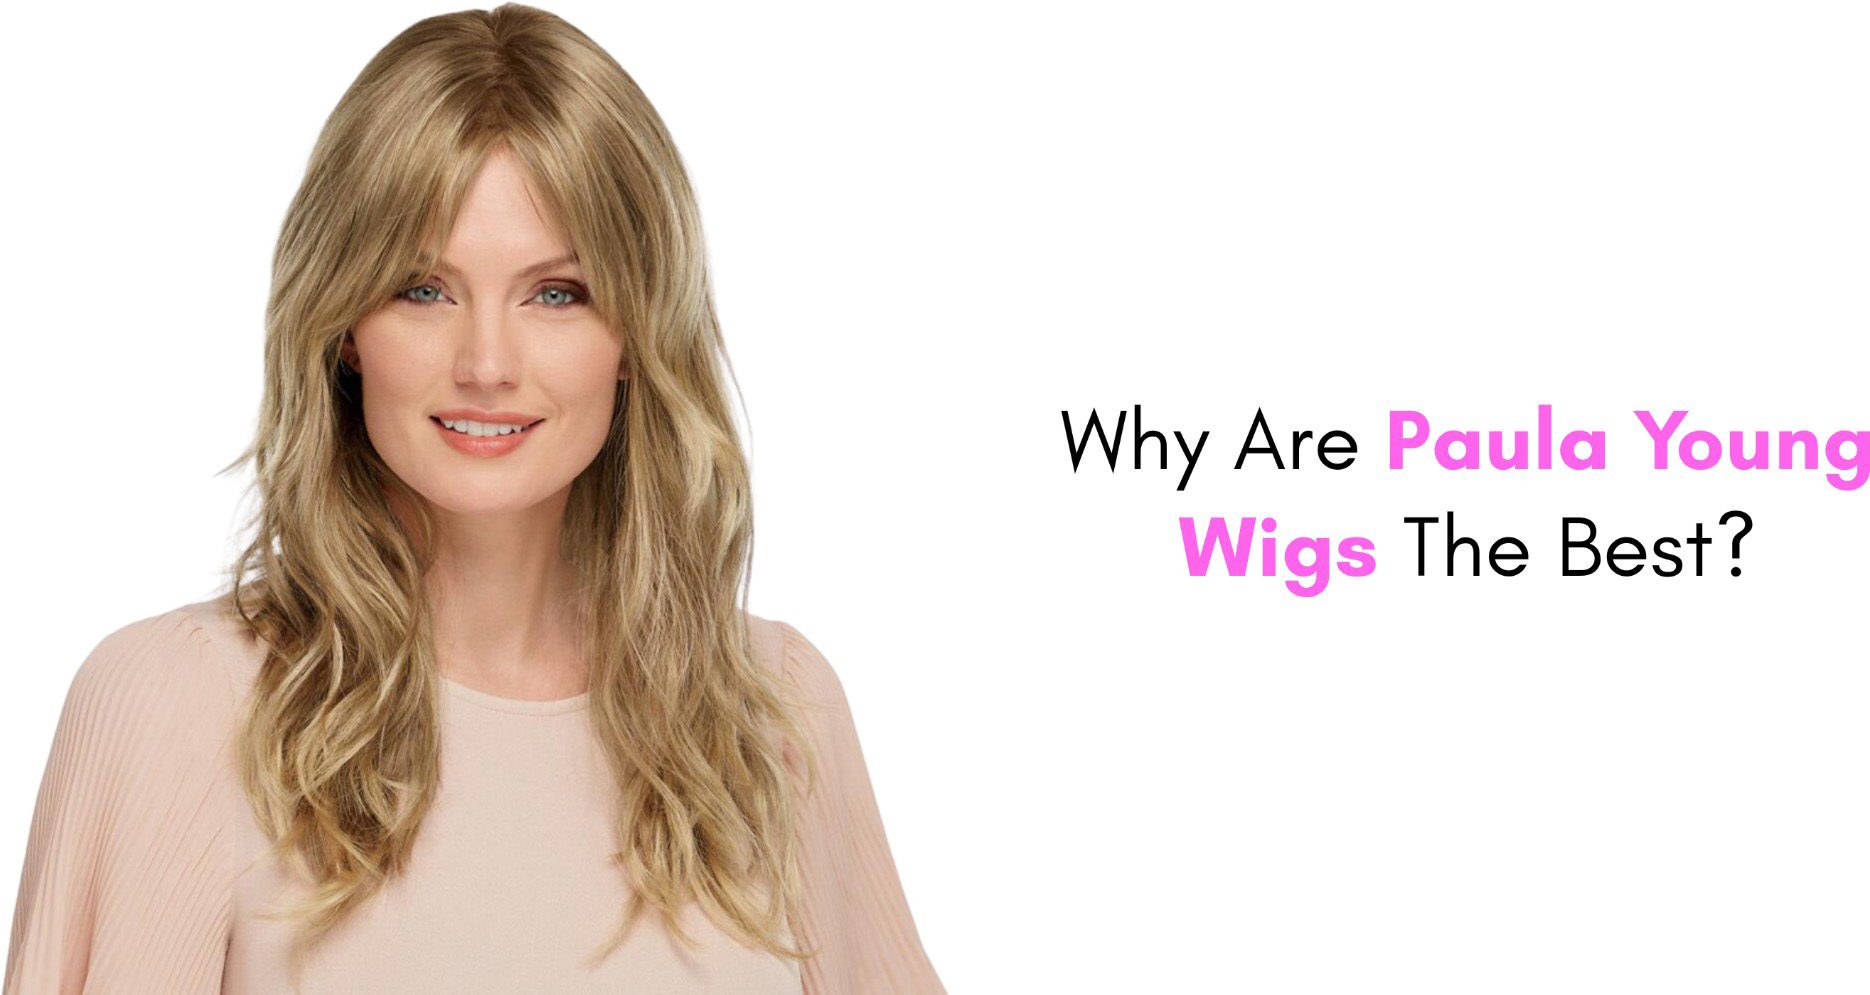 Why Are Paula Young Wigs The Best?